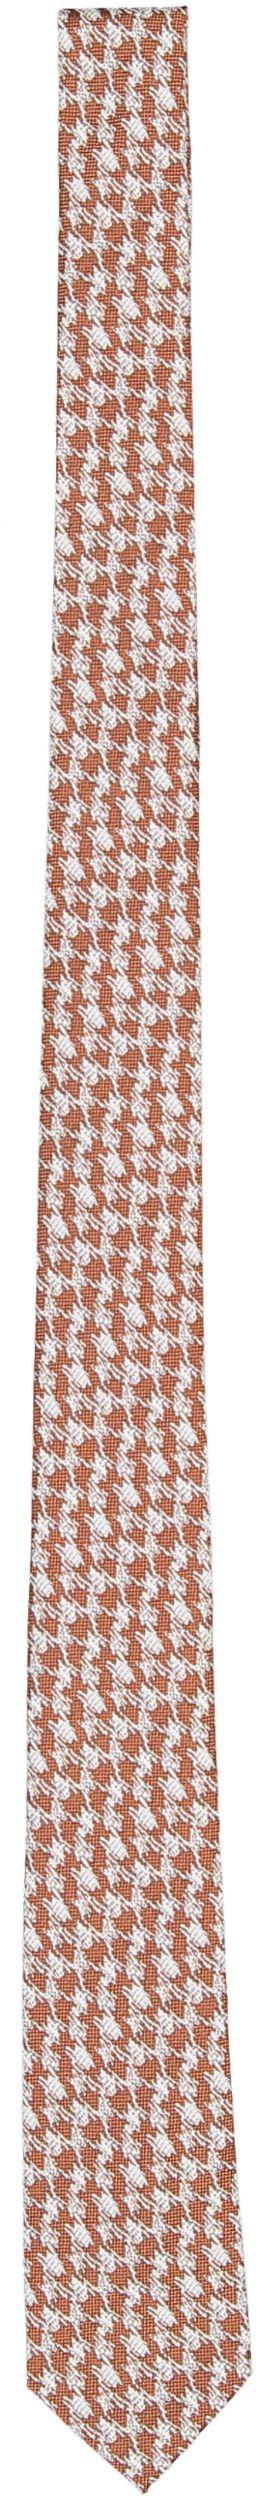 T.O. Collection Mens Necktie - TO215